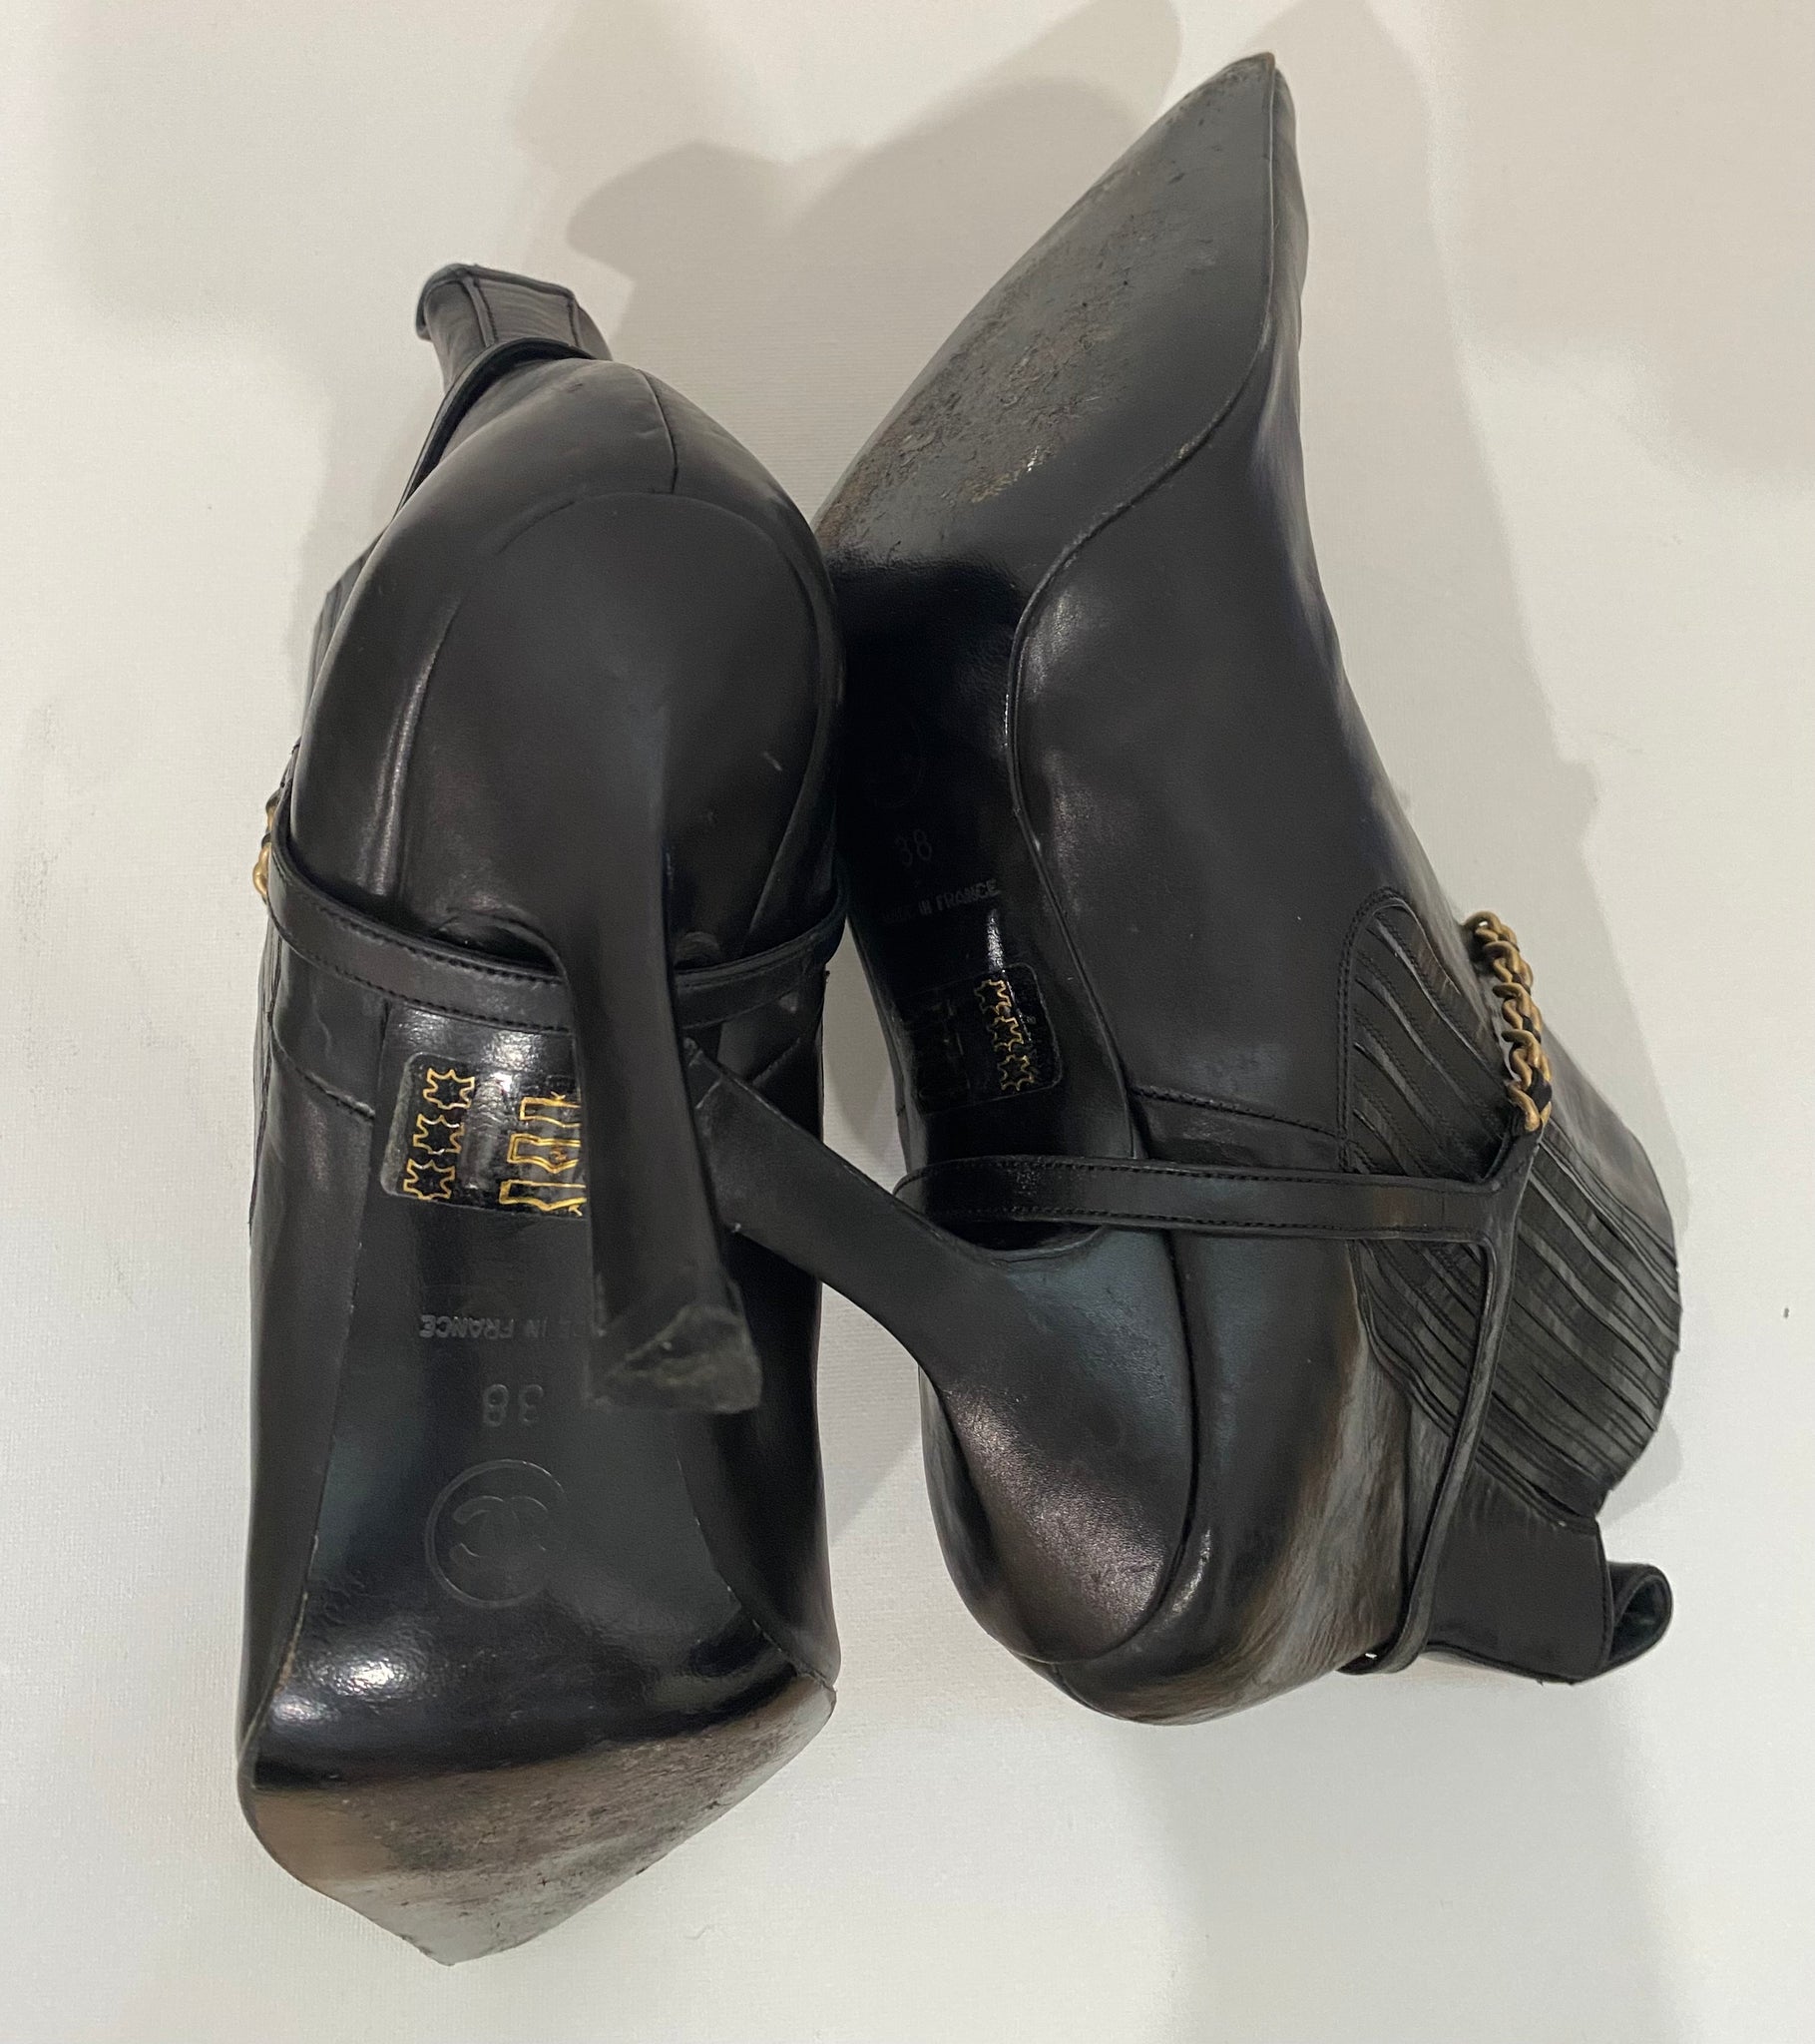 Vintage 90's Chanel Black Leather Pointed Toe Boots